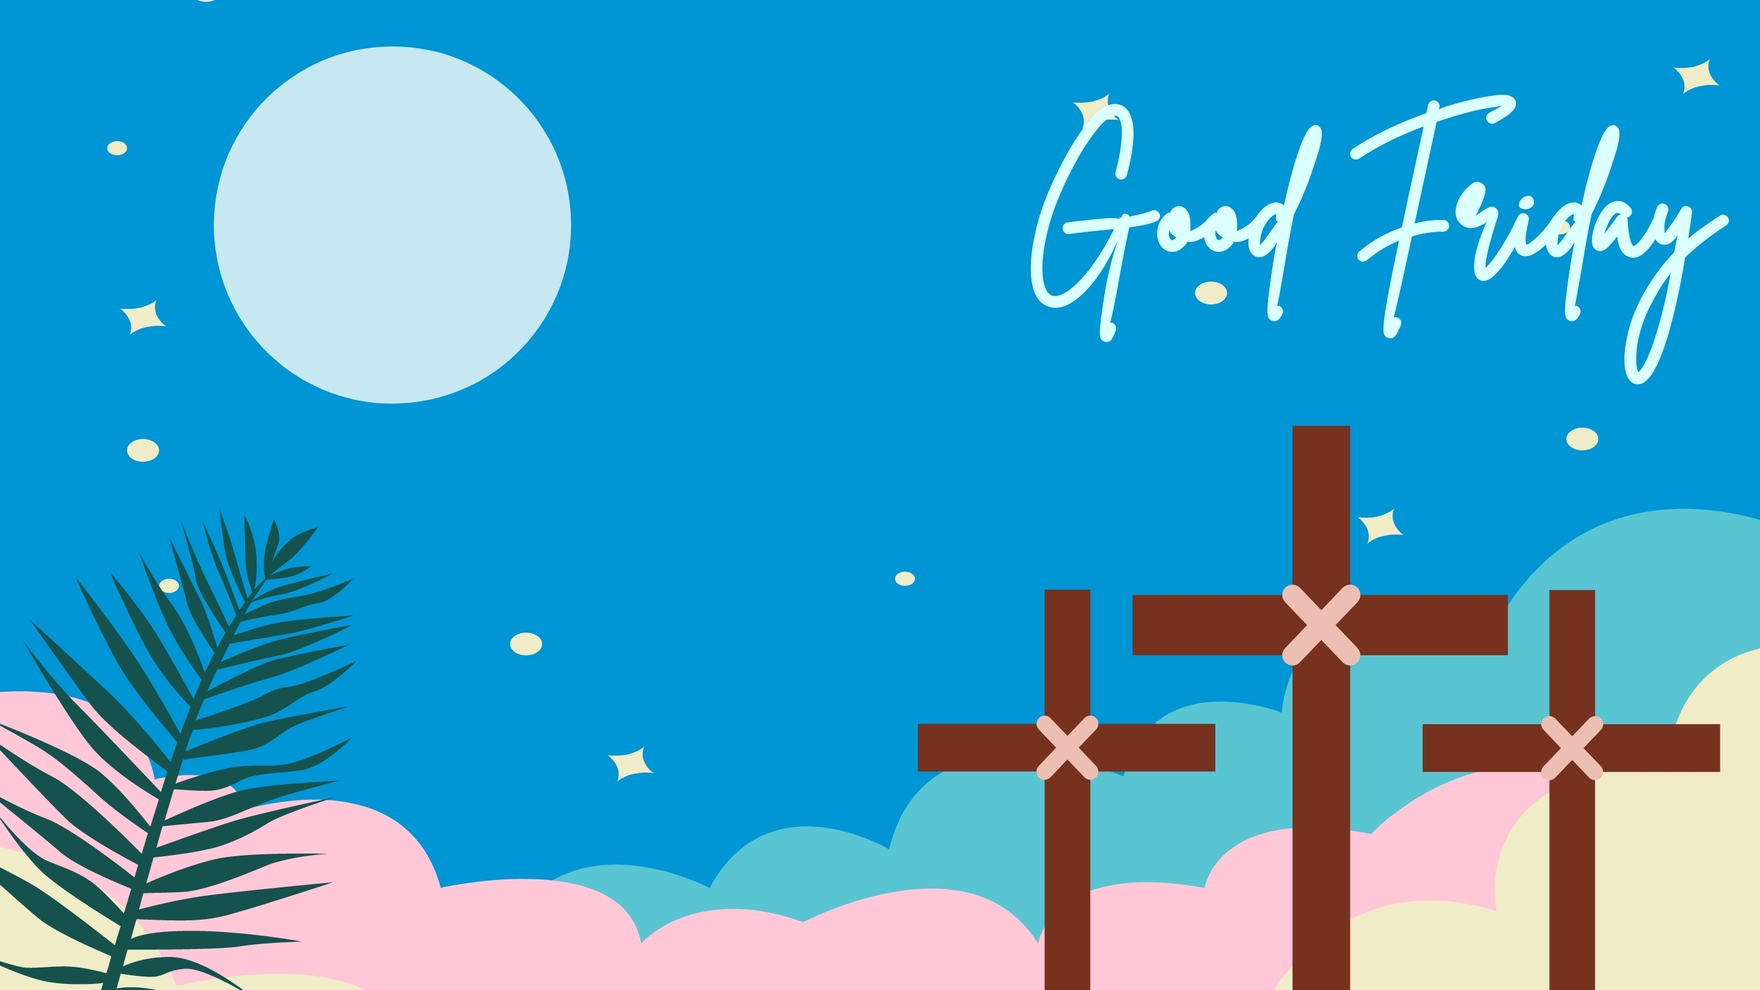 Good Friday Colorful Background